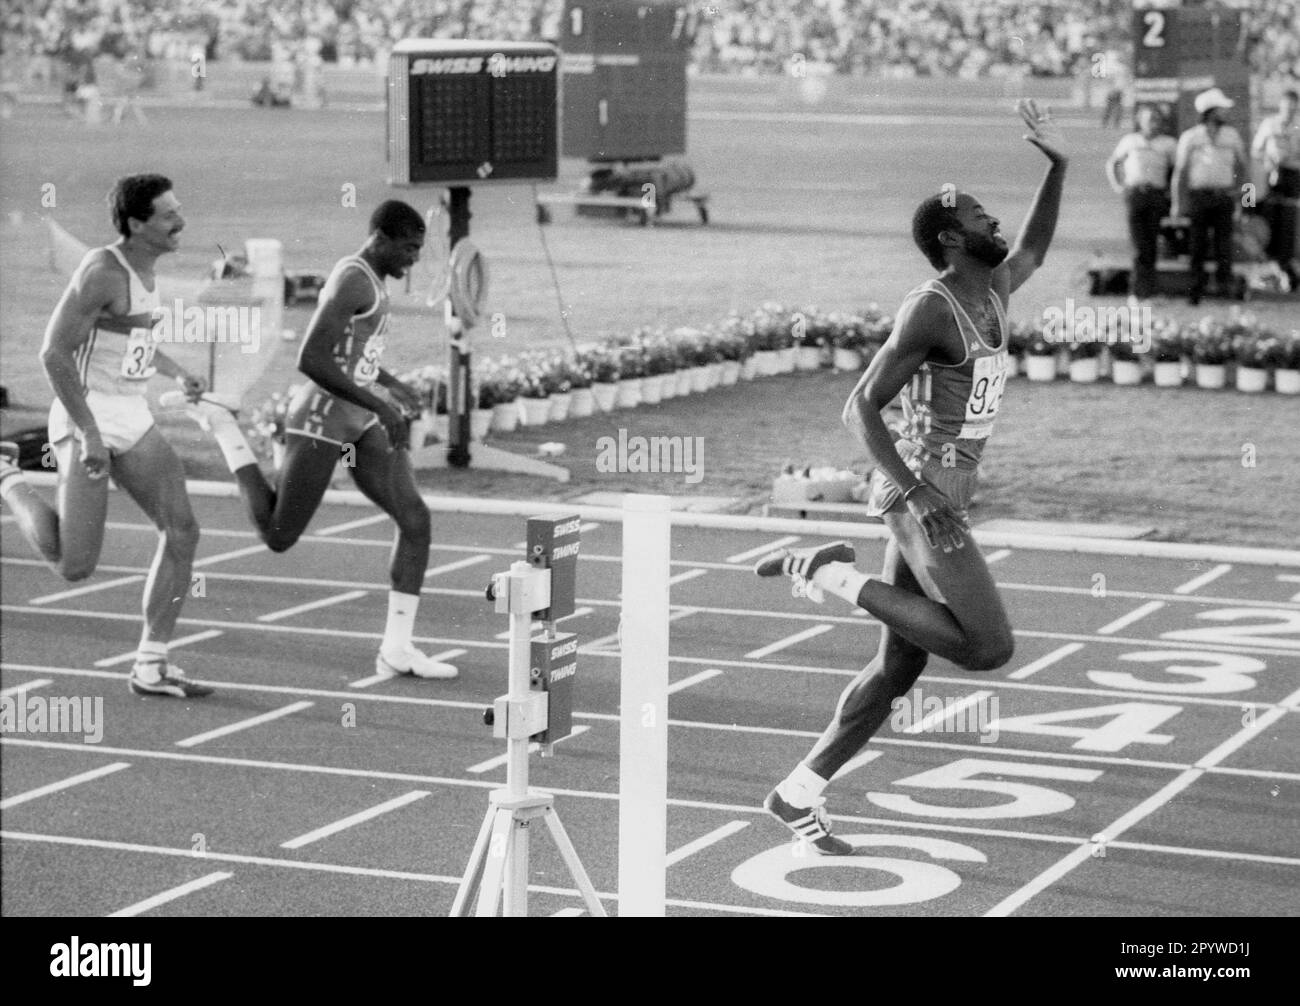 Olympic Games 1984 in Los Angeles. Finish photo 400m hurdles: Edwin Moses (USA) at the finish line ahead of Danny Harris (USA) and Harald Schmid (BRD) 05.08.1984. [automated translation] Stock Photo